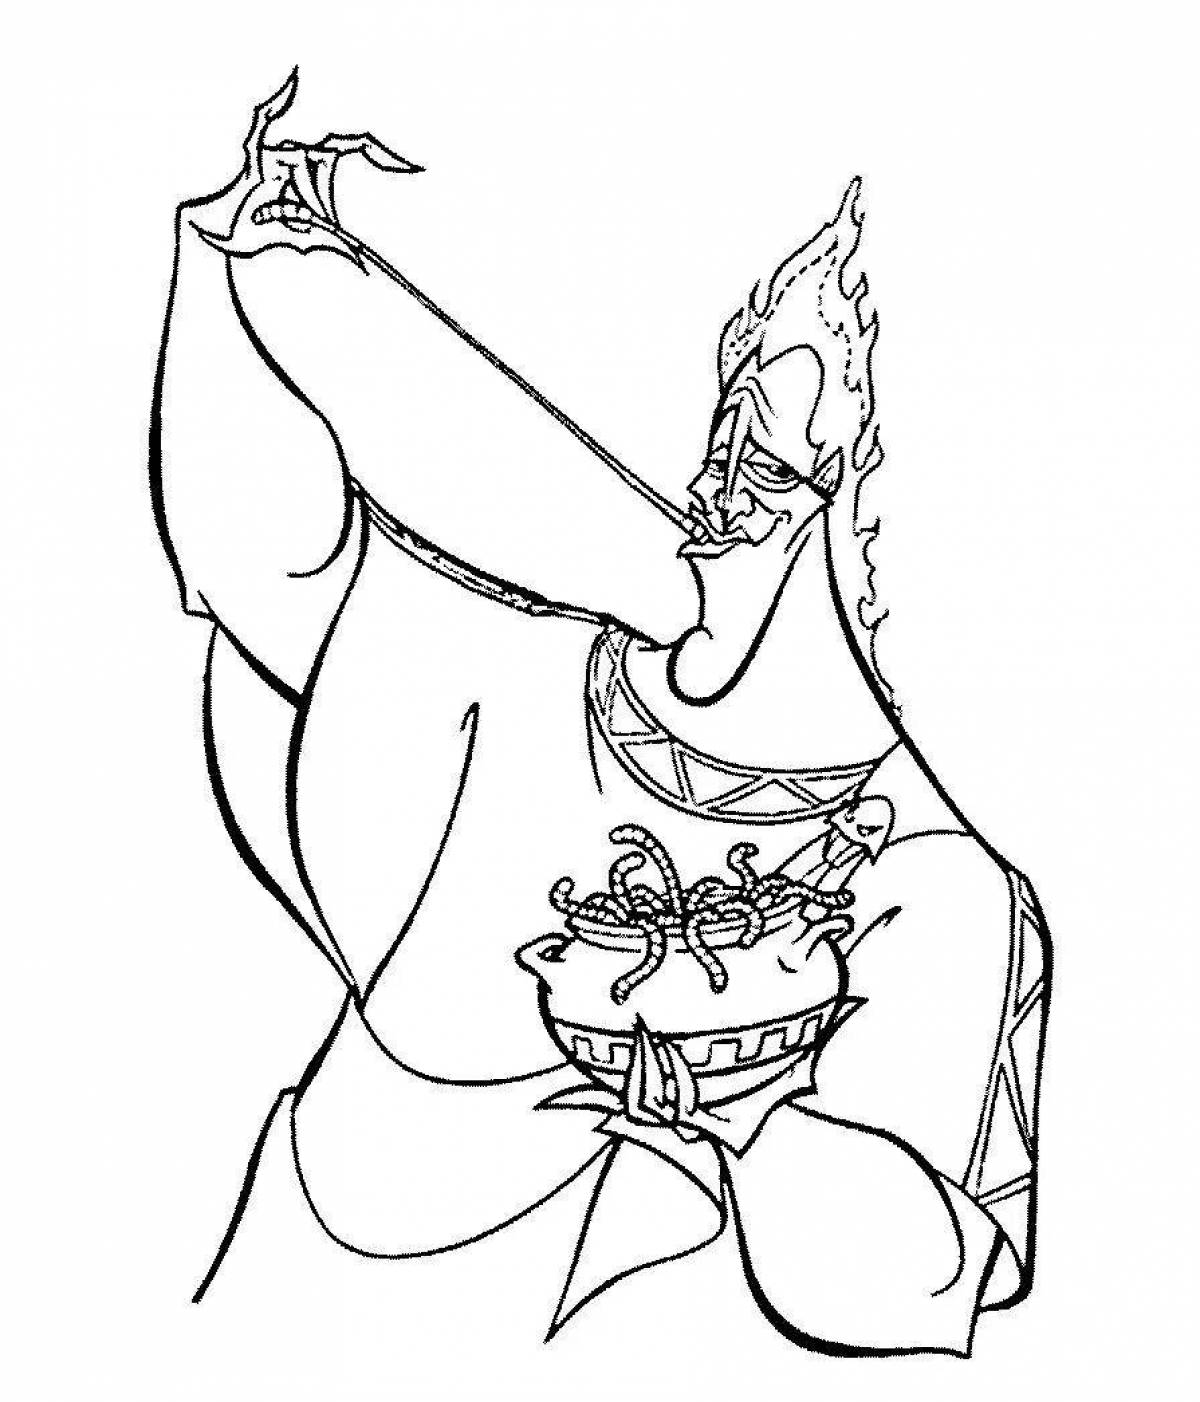 Glorious Hades coloring page